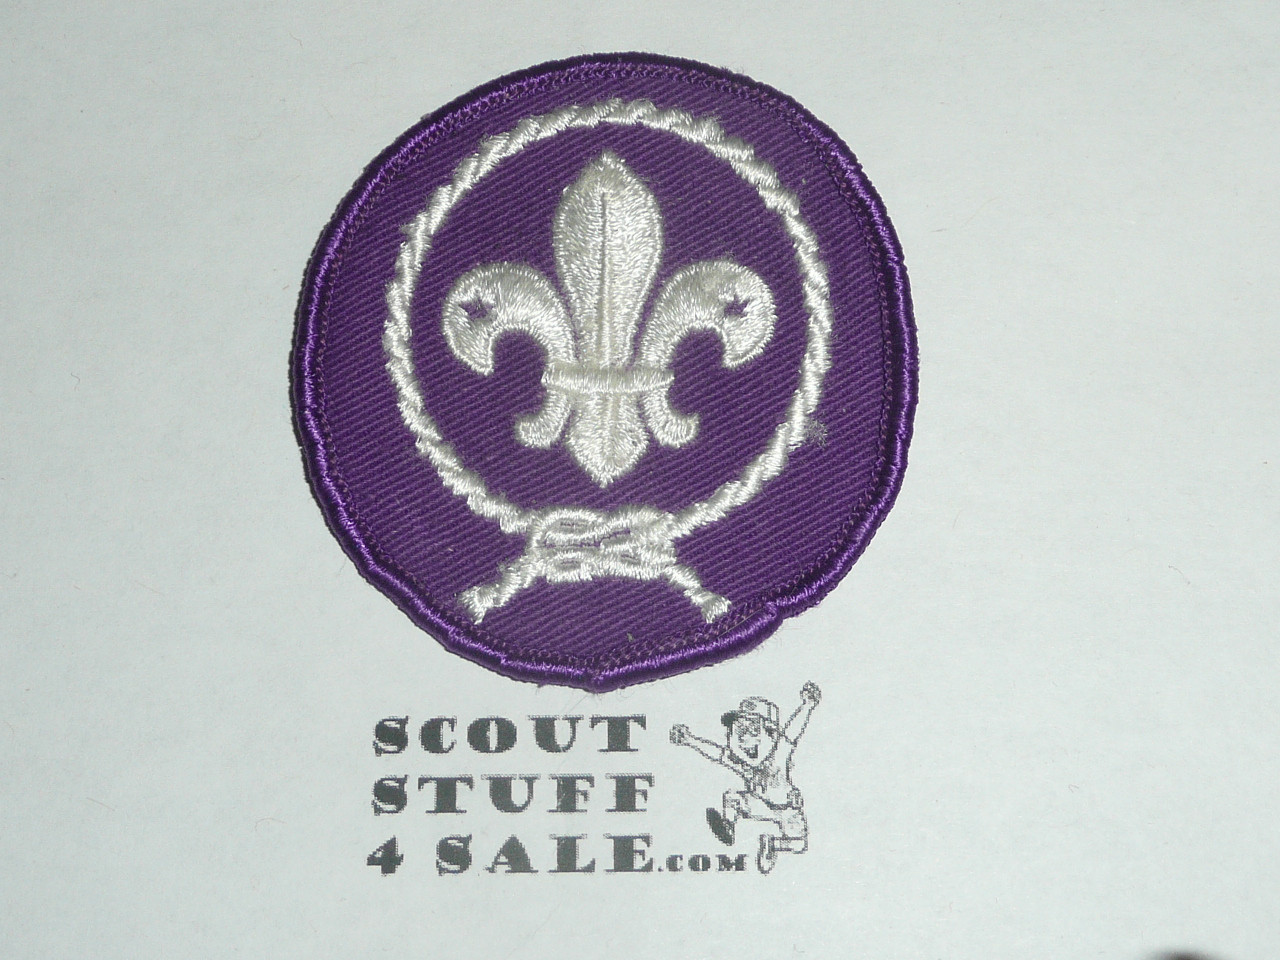 World Scouting Crest / Emblem Patch, embroidered on twill, 2 1/2"